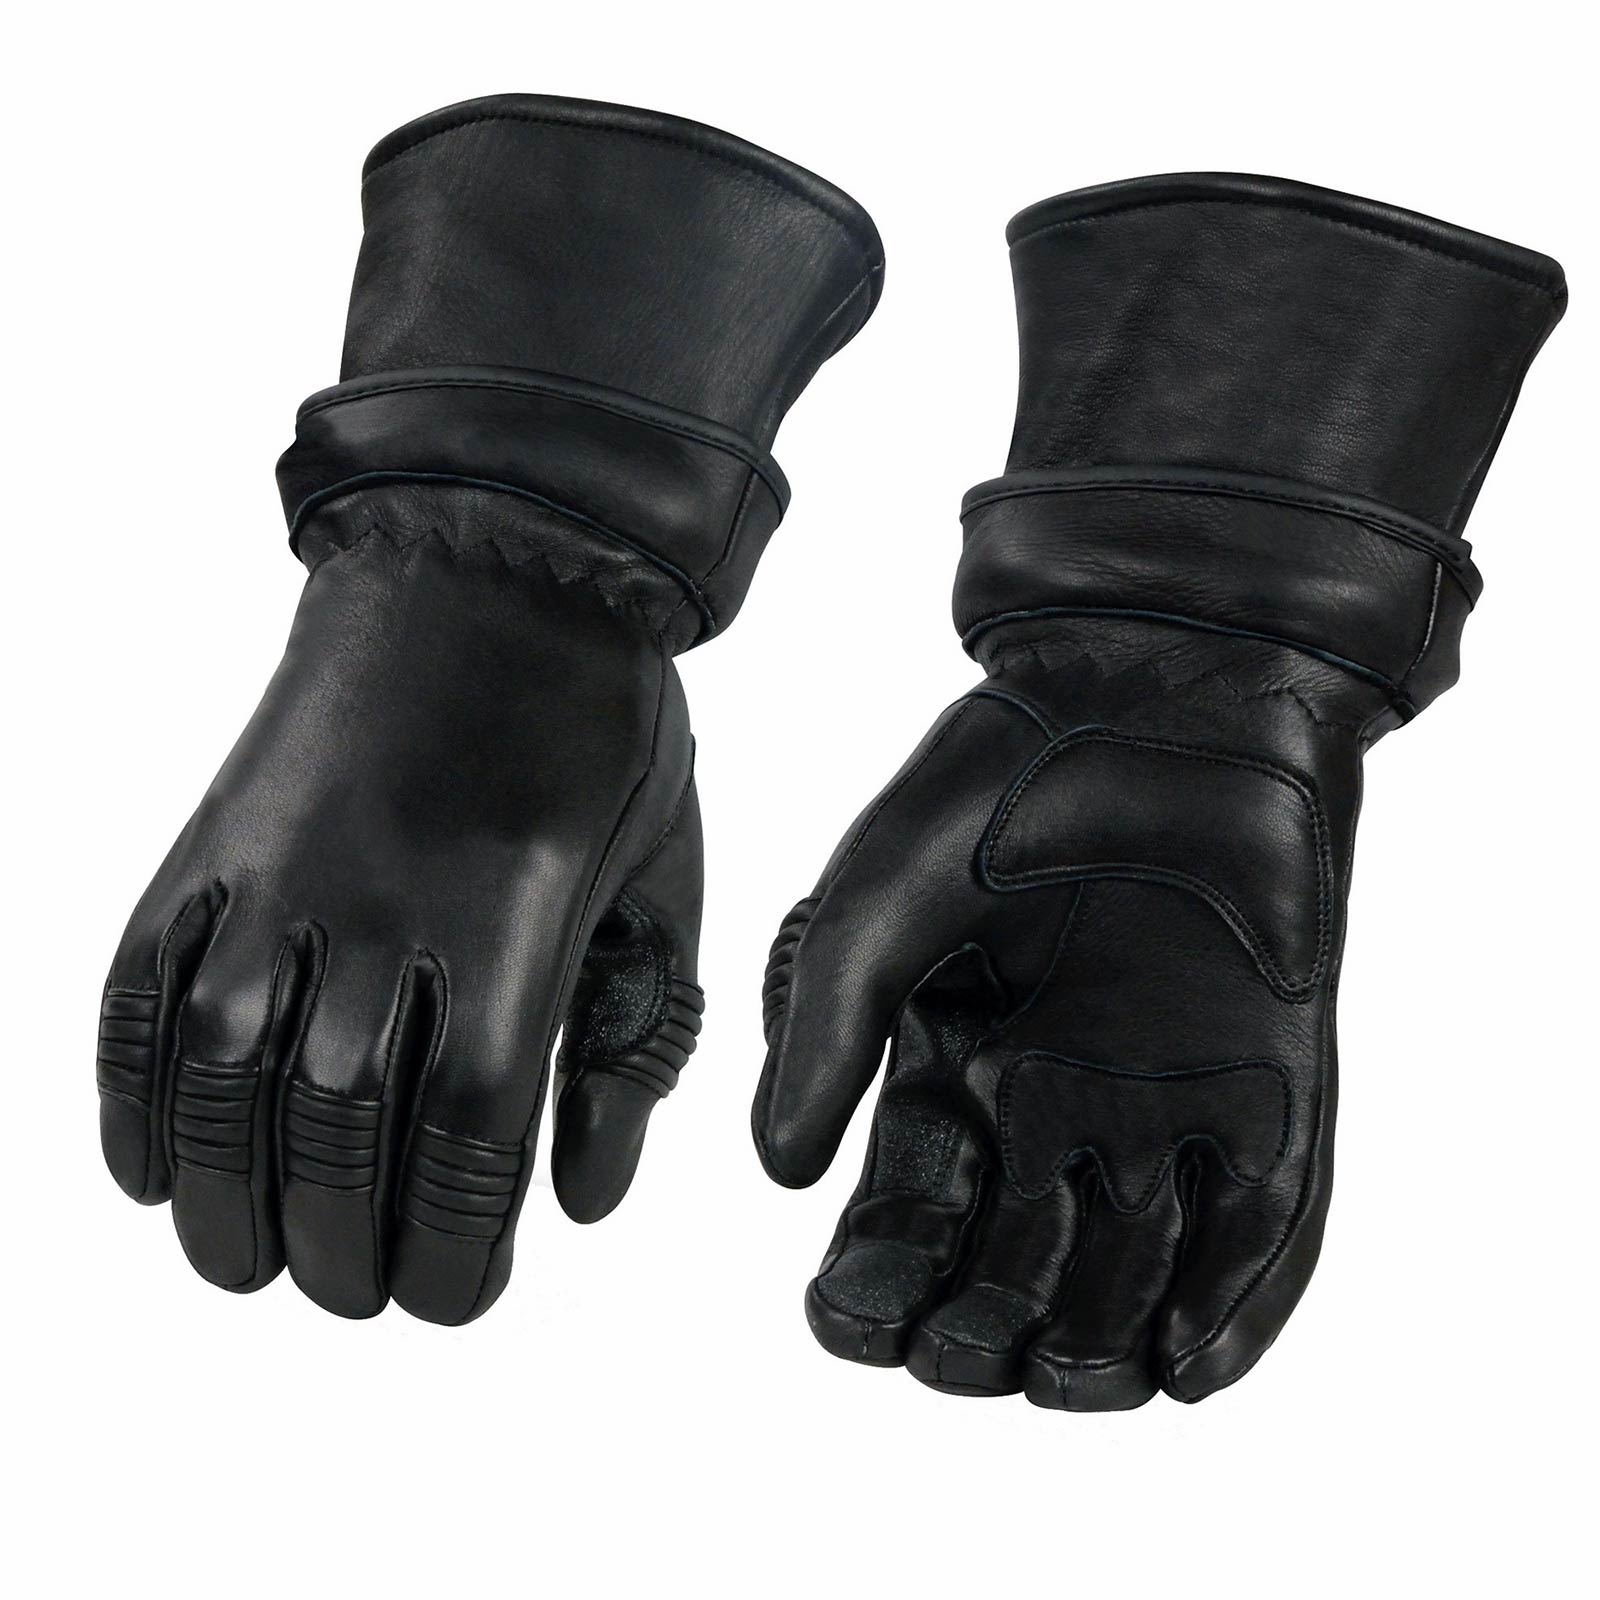 Milwaukee Leather SH462 Men's Black Leather Gel Palm Fingerless Motorcycle Hand Gloves w/ Soft and Stylish Knuckle Pads 3X-Large, Size: One Size